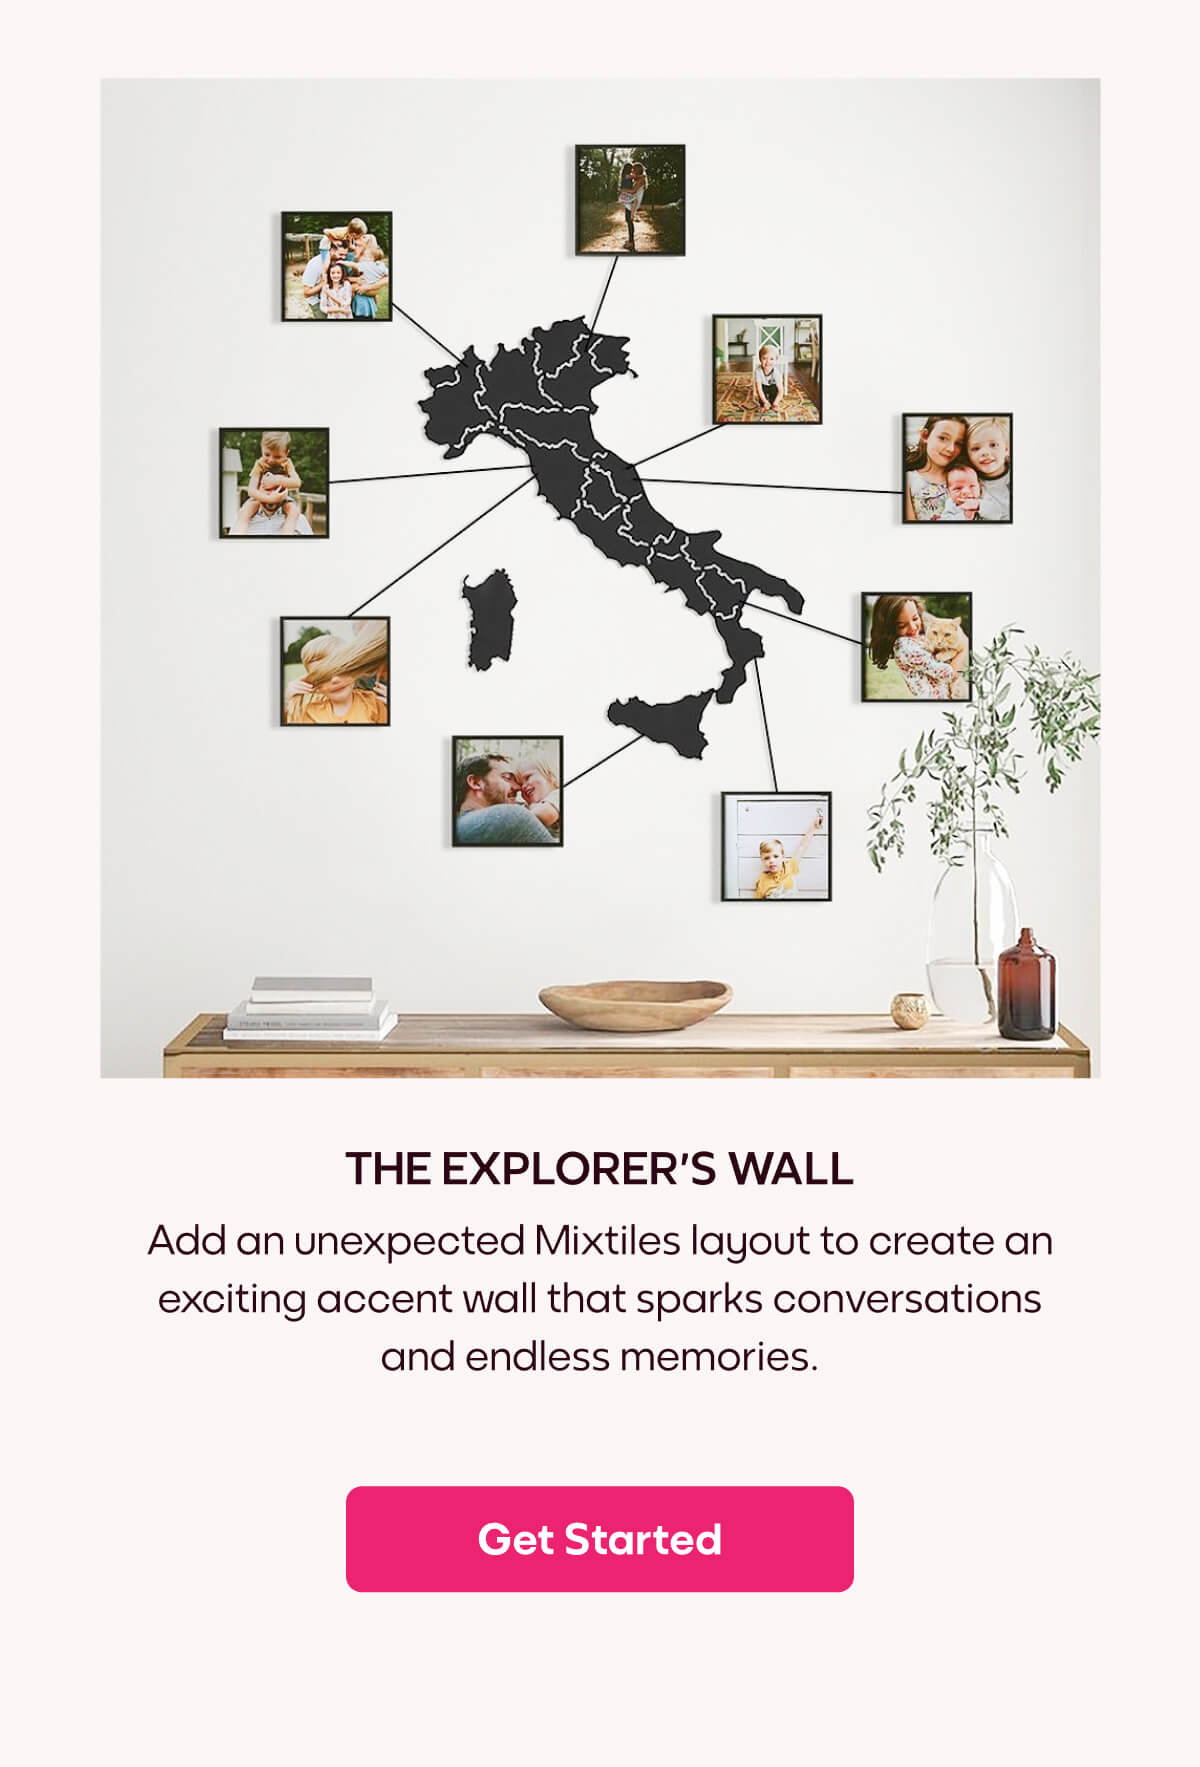 [MIXTILES] Design compliment worthy walls with Mixtiles. | ORDER NOW